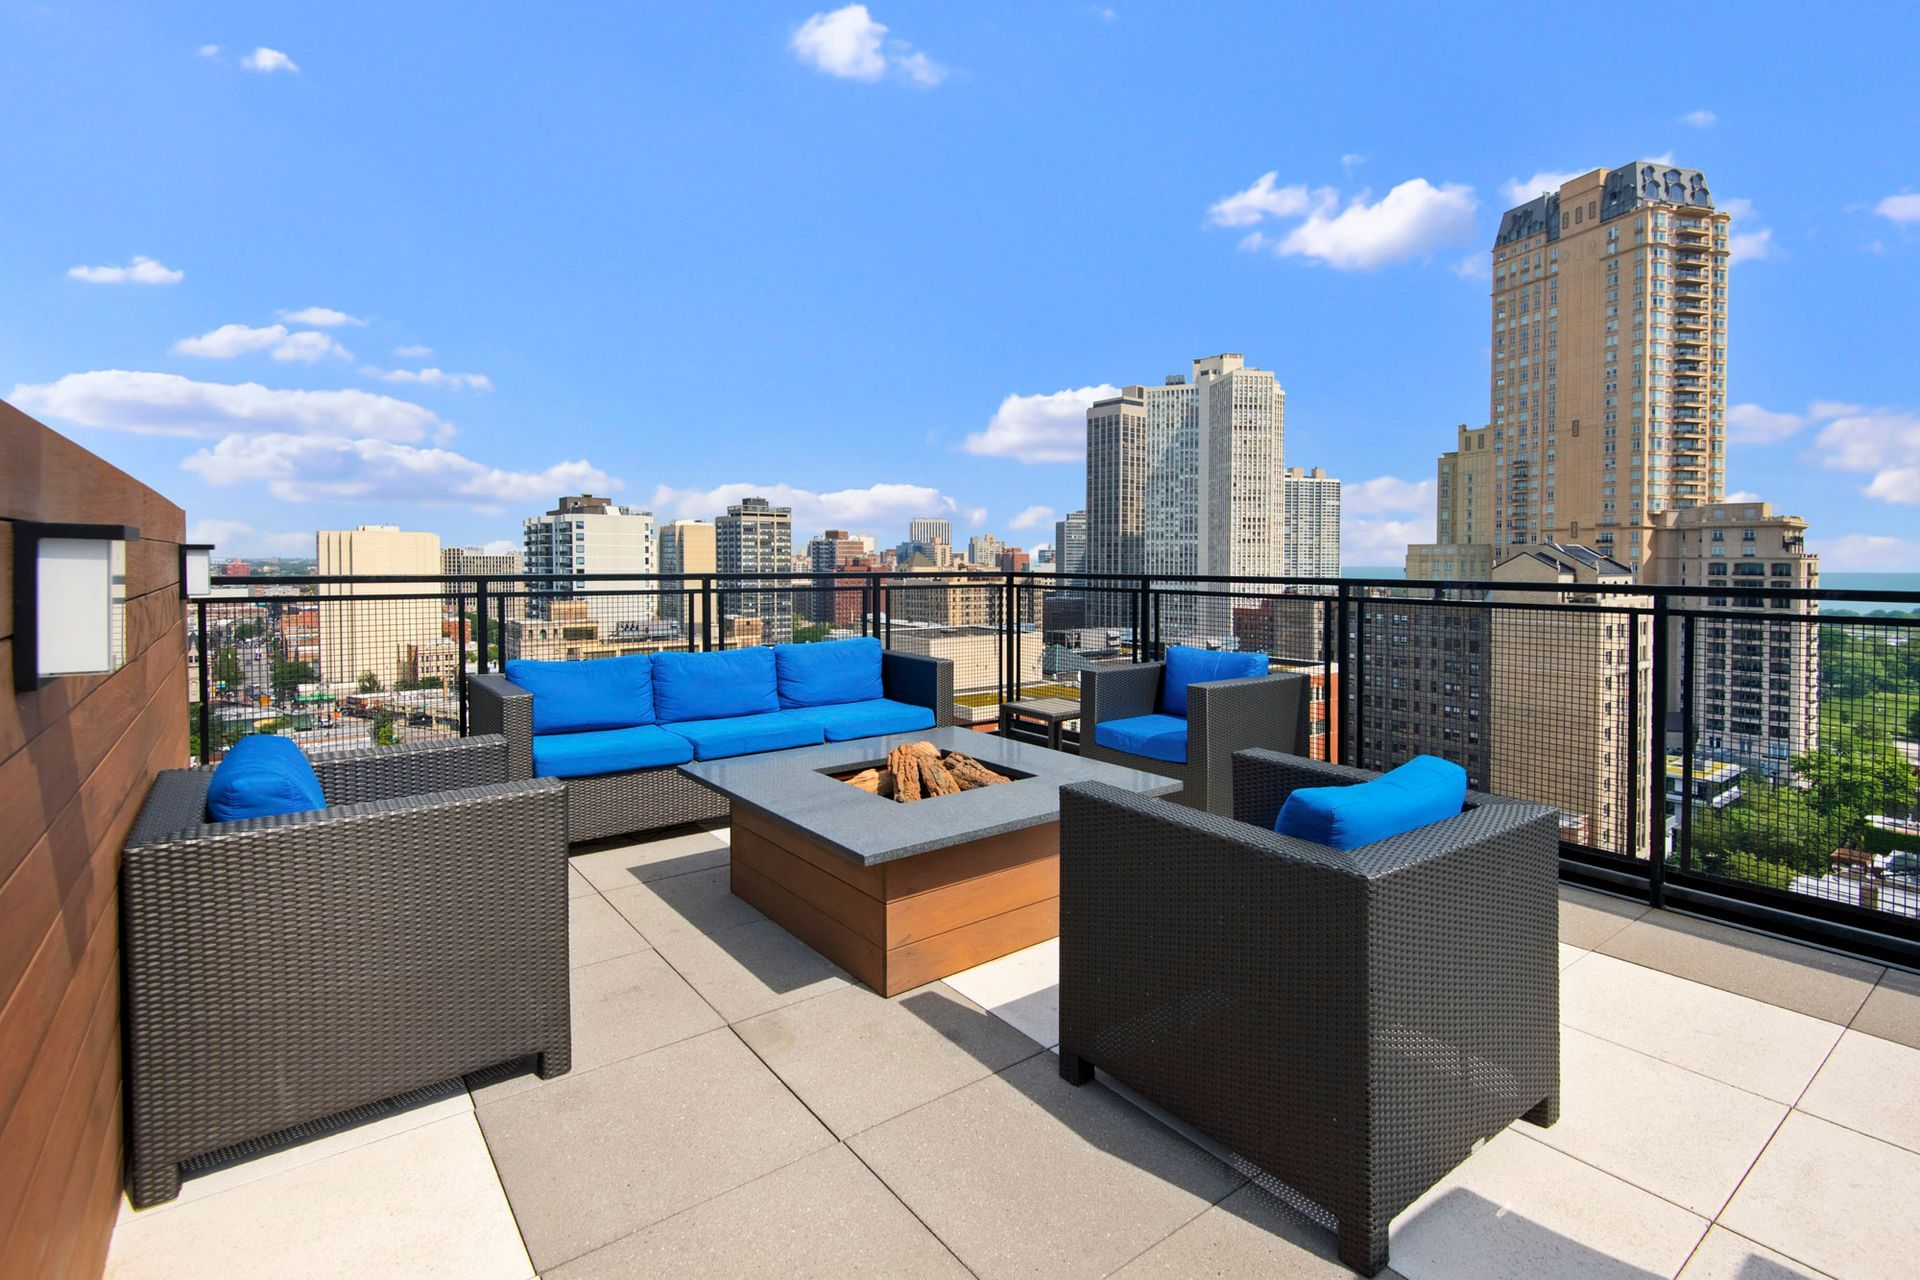 Rooftop Lounge at Park Lincoln by Reside.